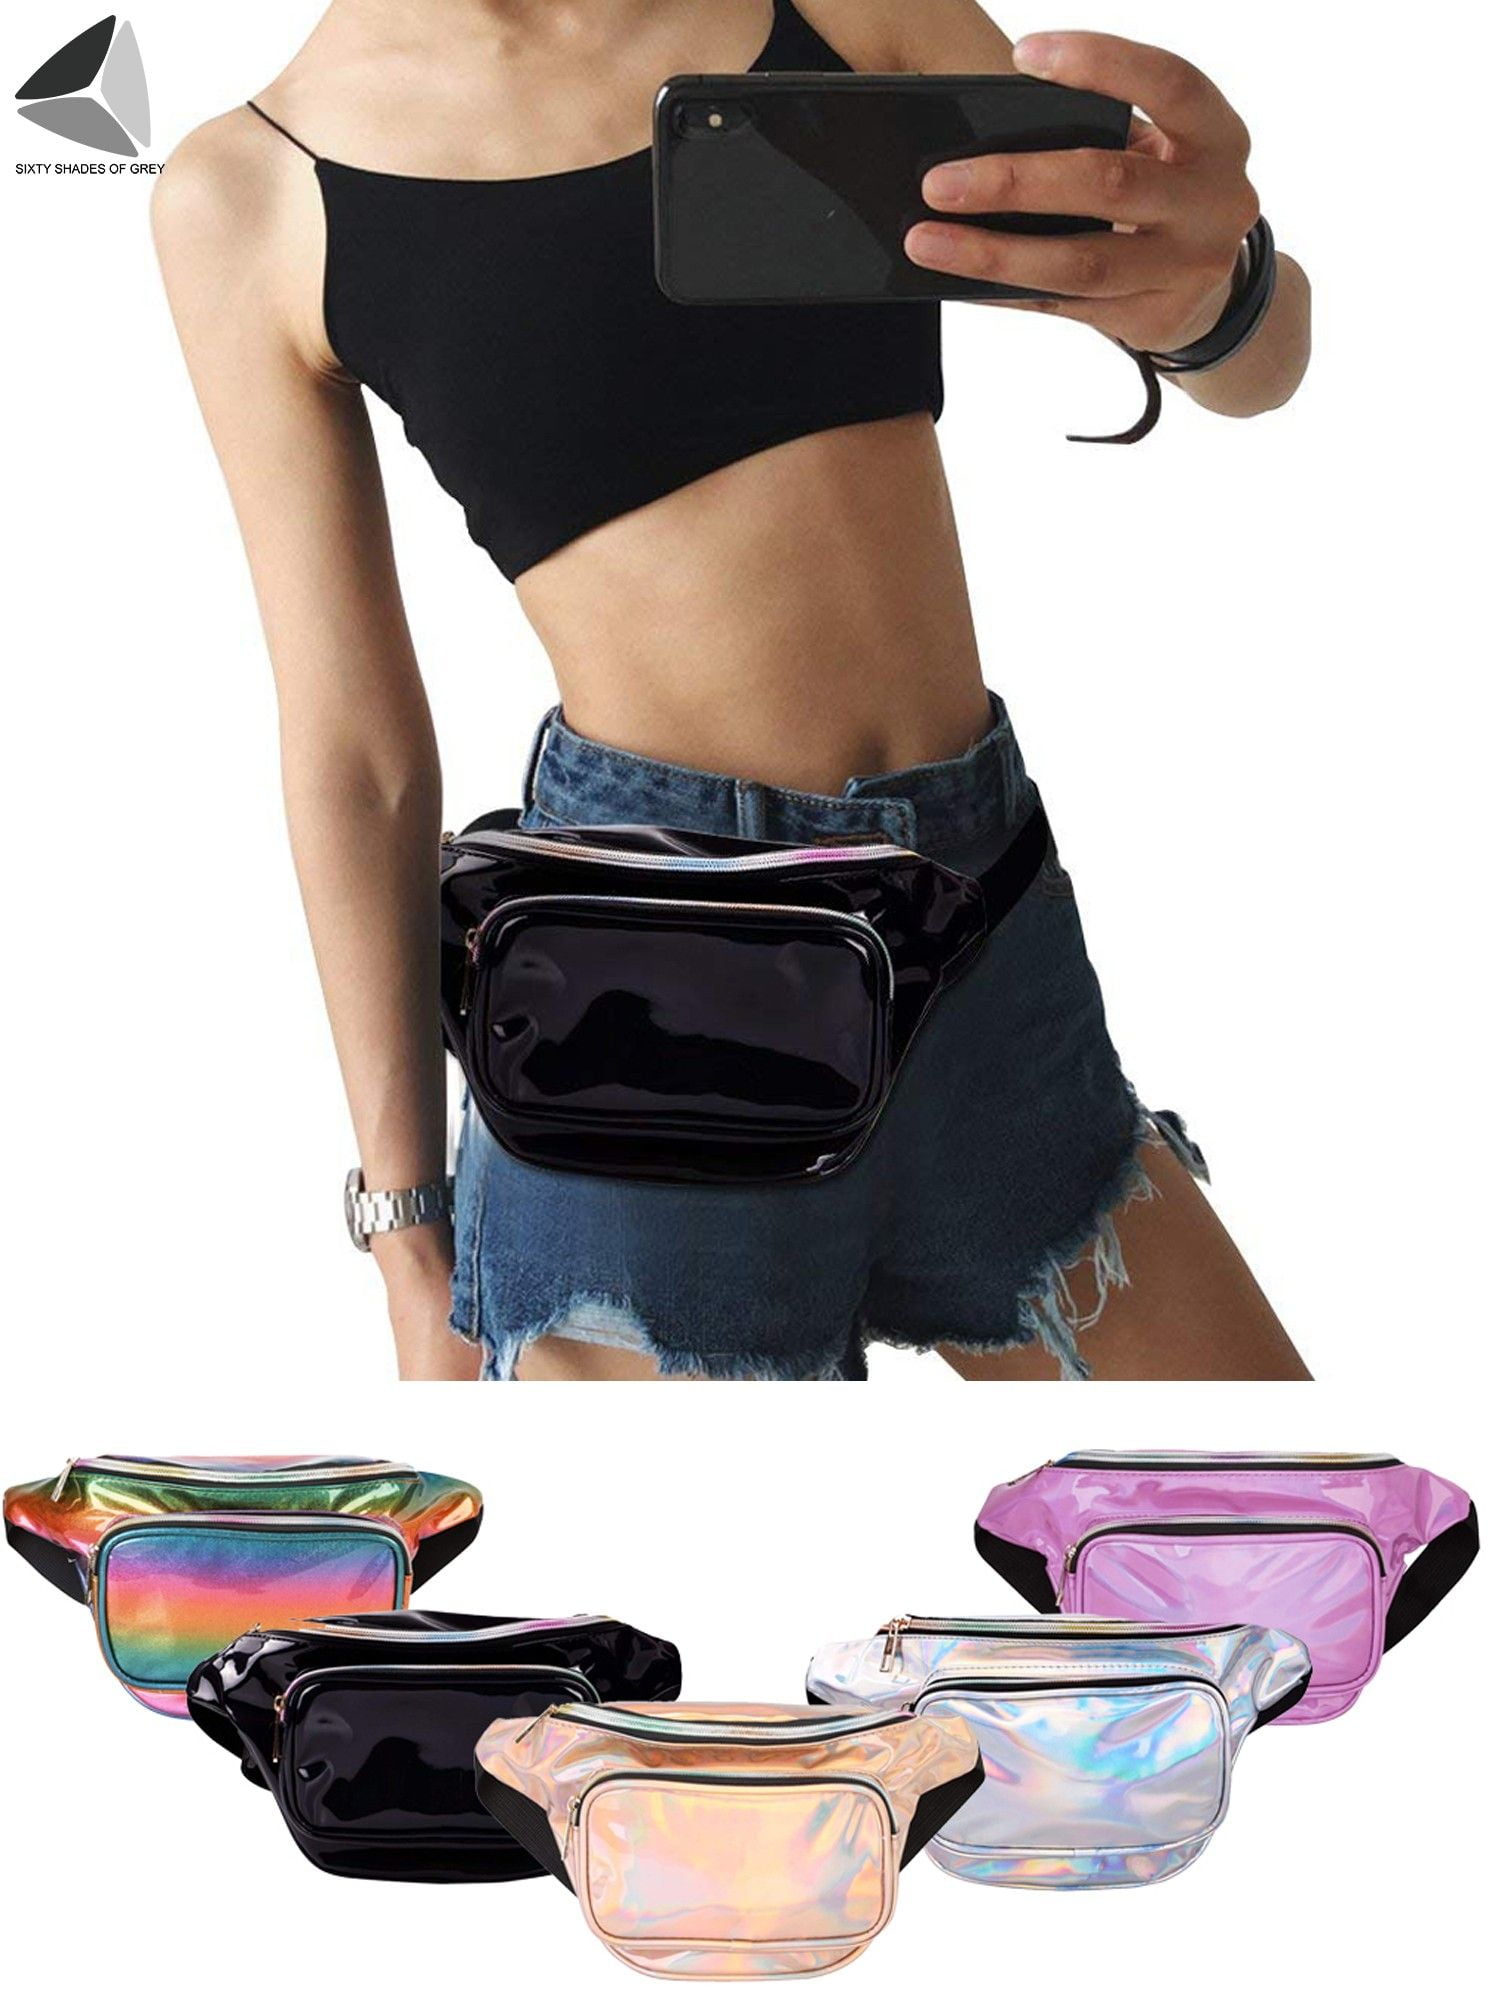 Women Fanny Pack PU Leather Metalic Chain Waist Pack Portable Waterproof Storage Bags Adjustable Belt Waist Bag for Travel Running Sports